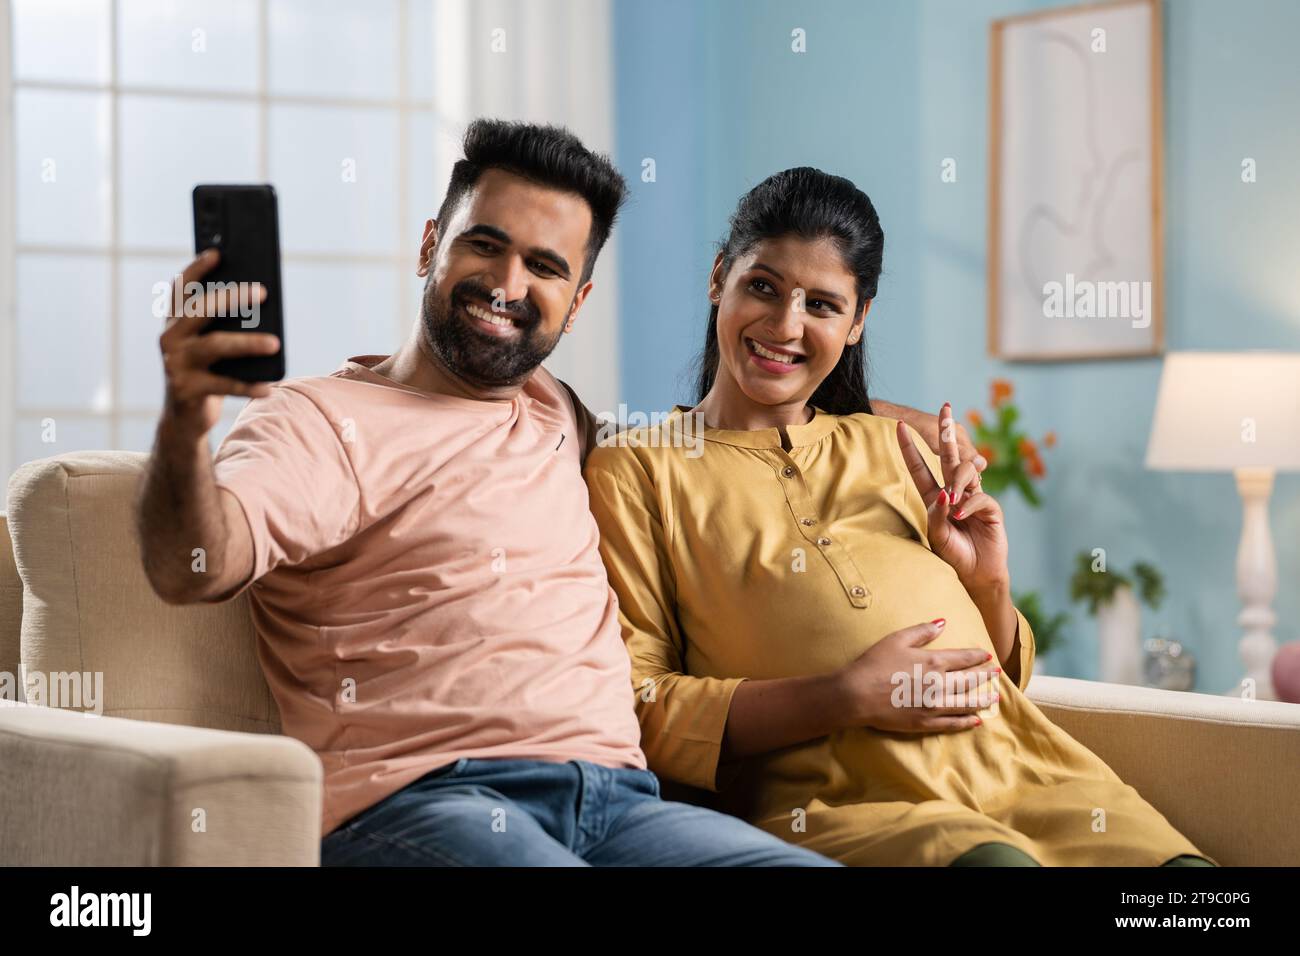 Happy Indian husband with pregnant wife taking selfie on mobile phone - concept of parenthood, family bonding and new beginnings Stock Photo